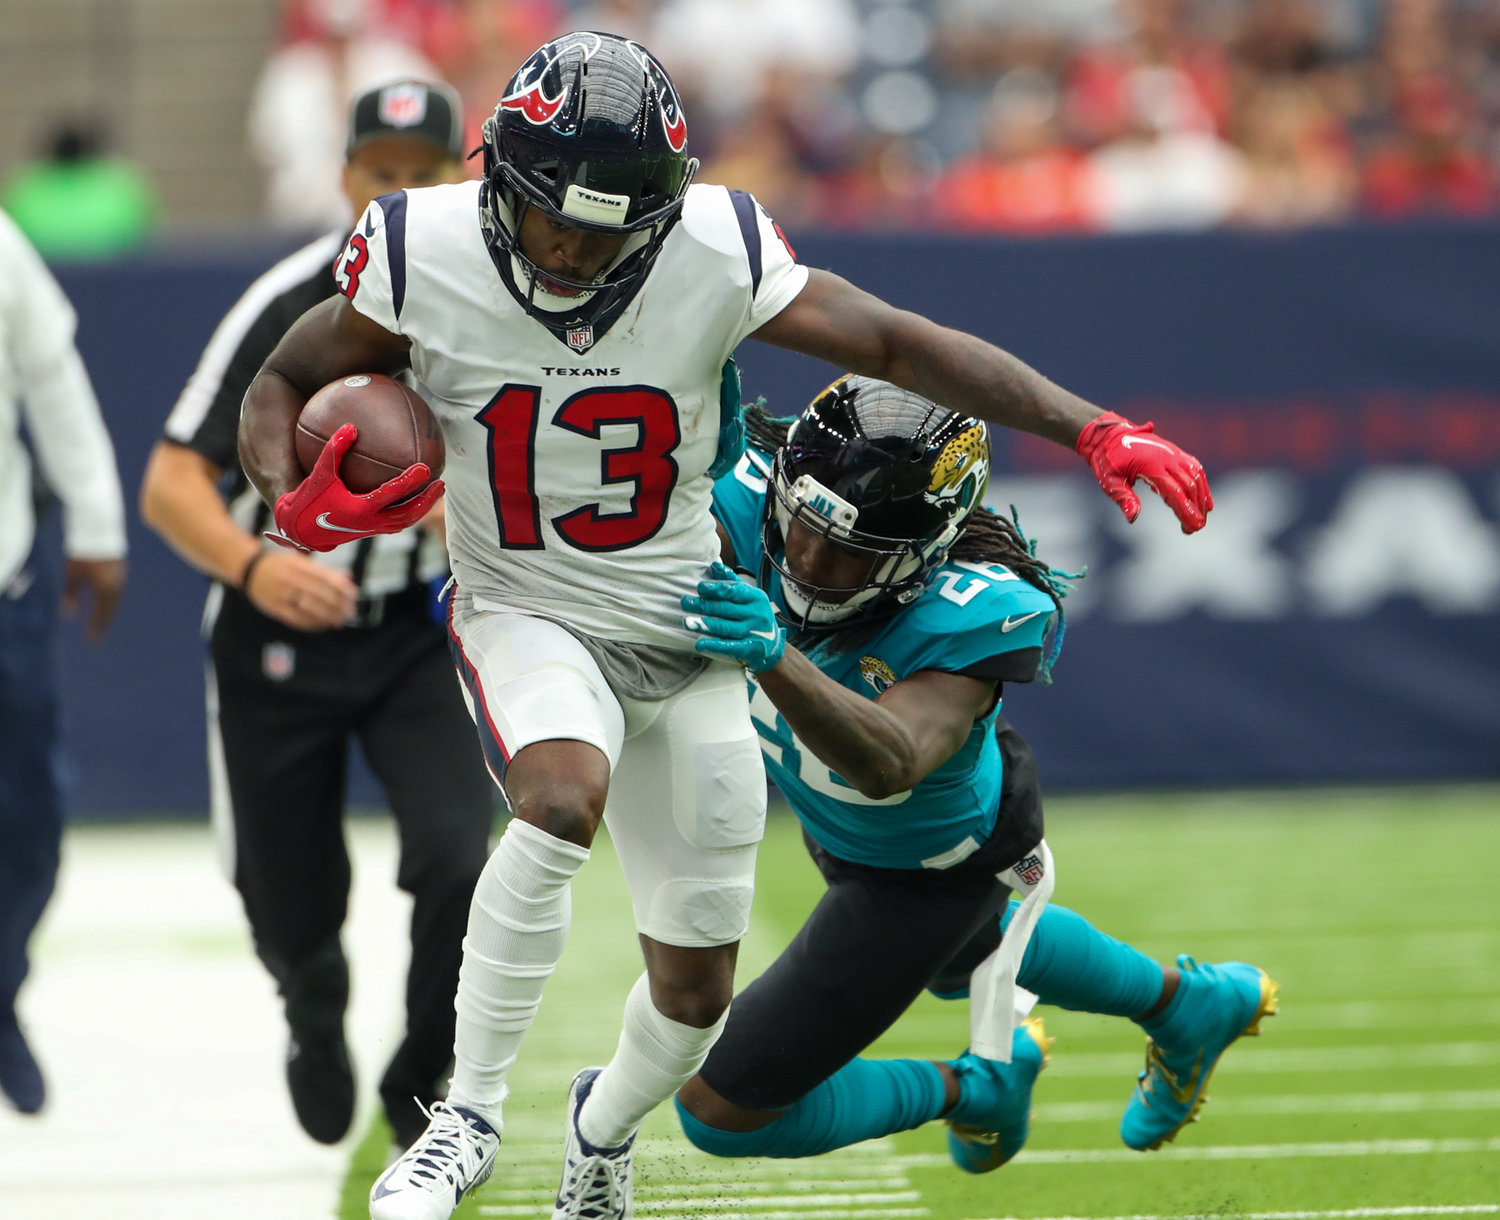 Houston Texans wide receiver Brandin Cooks (13) carries the ball after a reception during the first half of an NFL game between the Houston Texans and the Jacksonville Jaguars on September 12, 2021 in Houston, Texas.